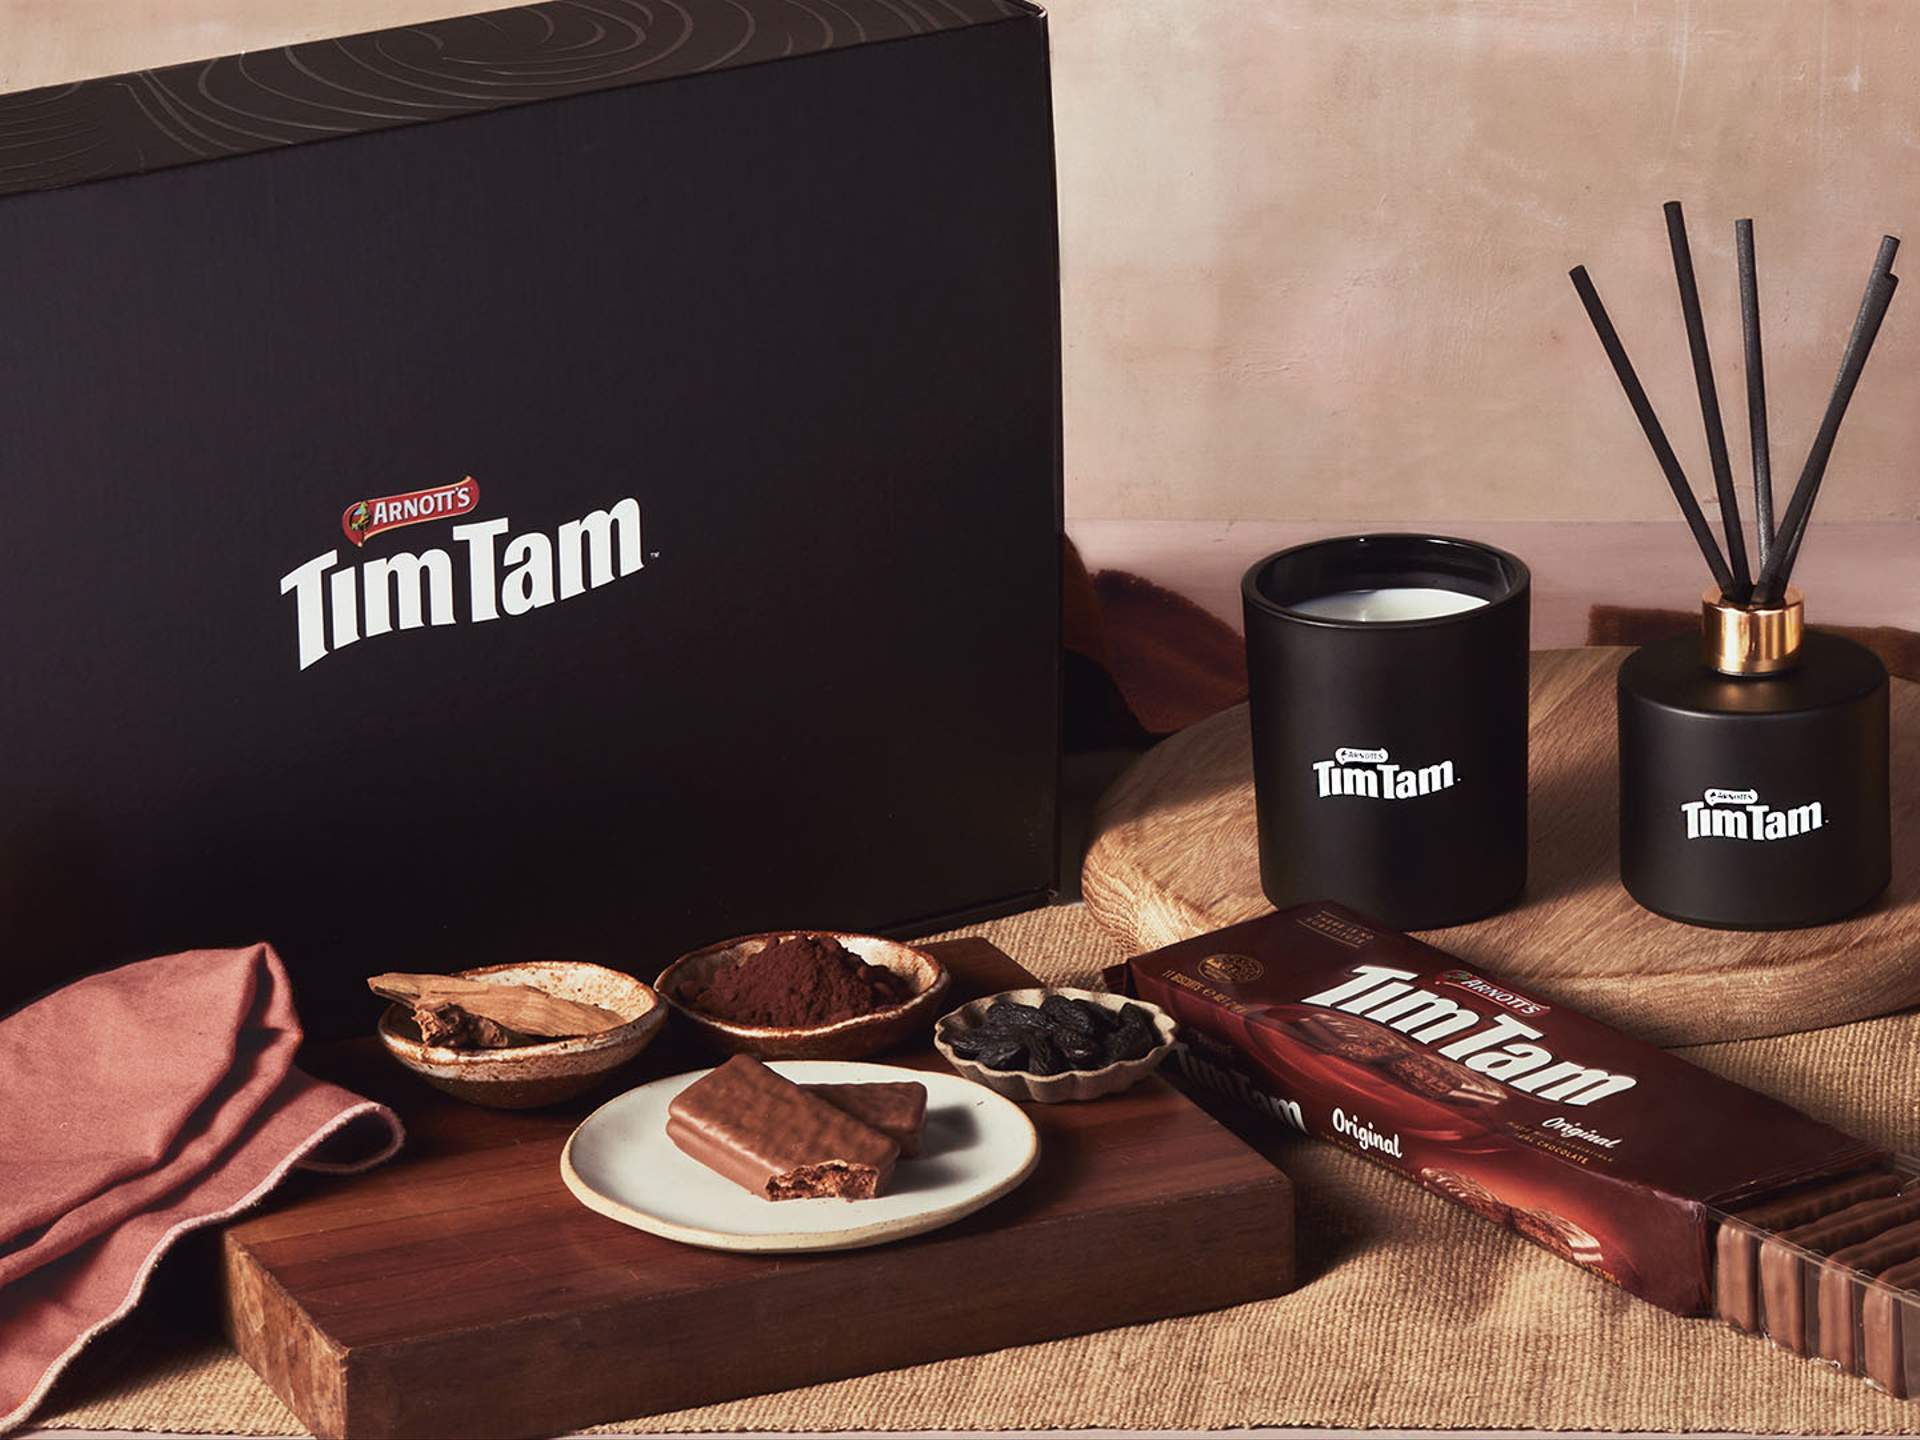 Arnott's Tim Tam - If Tim Tams had an affair with chocolate, this